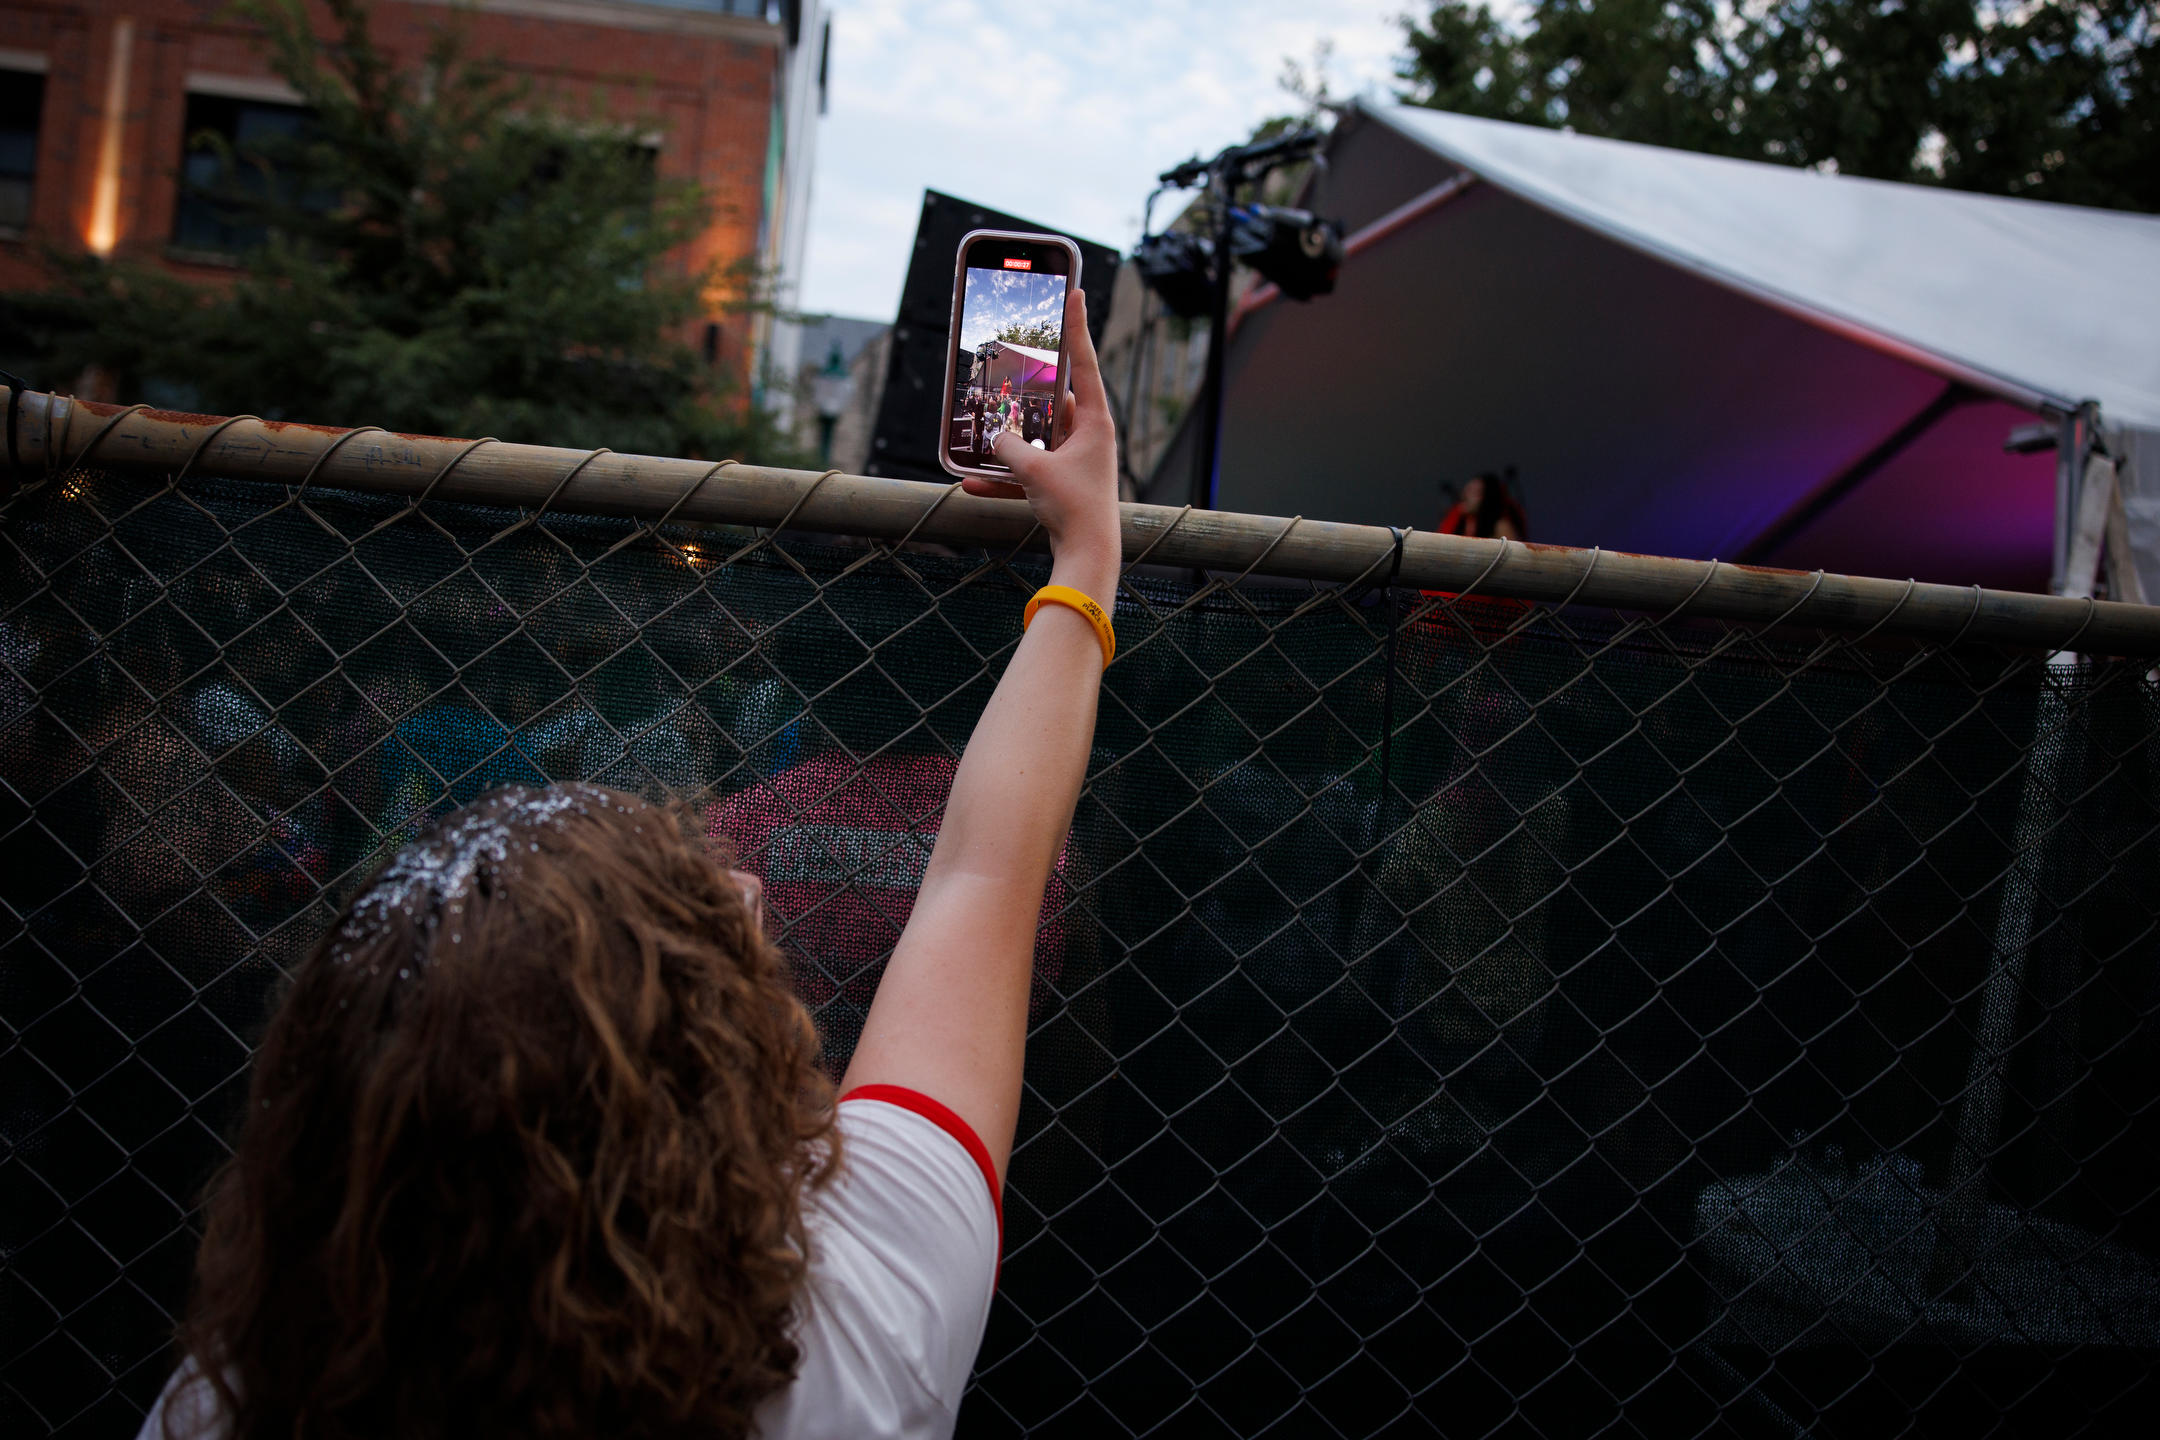 A festival goer reaches over a fence to record a performance by Santana Sword during Bloomington Pridefest on Kirkwood Avenue on Saturday, Aug. 26, 2023. (James Brosher/Indiana University)